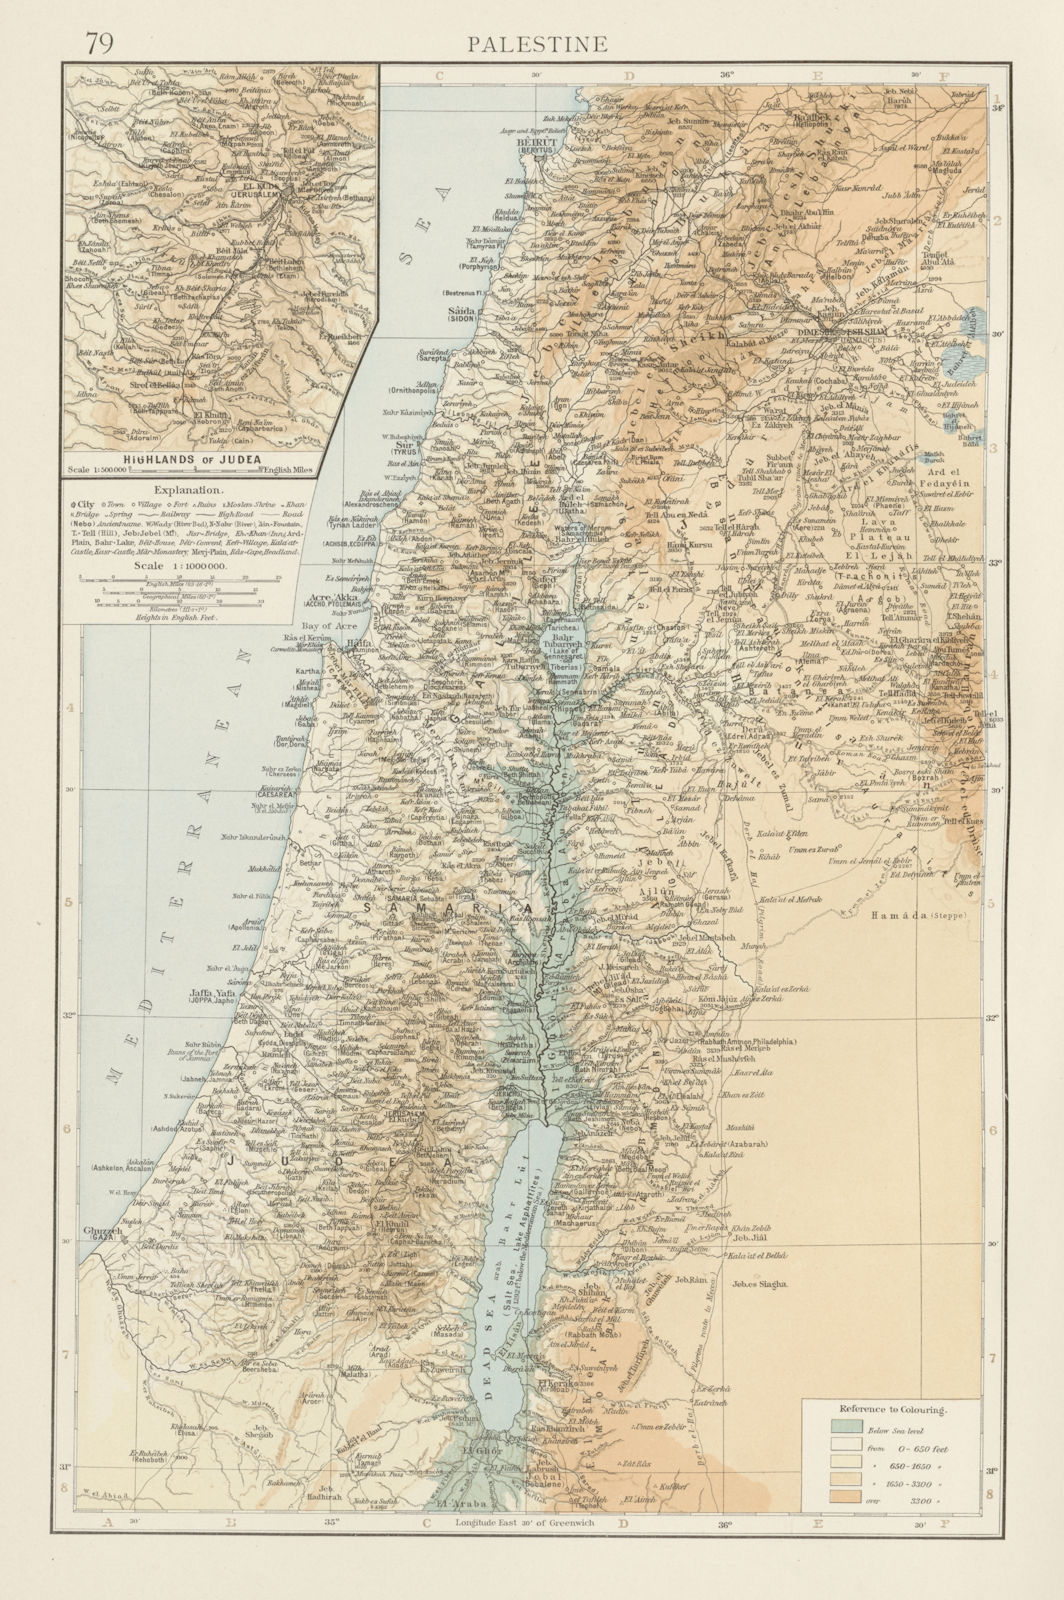 Associate Product Palestine. Judea highlands. Ancient & Arabic names. Holy land. TIMES 1900 map